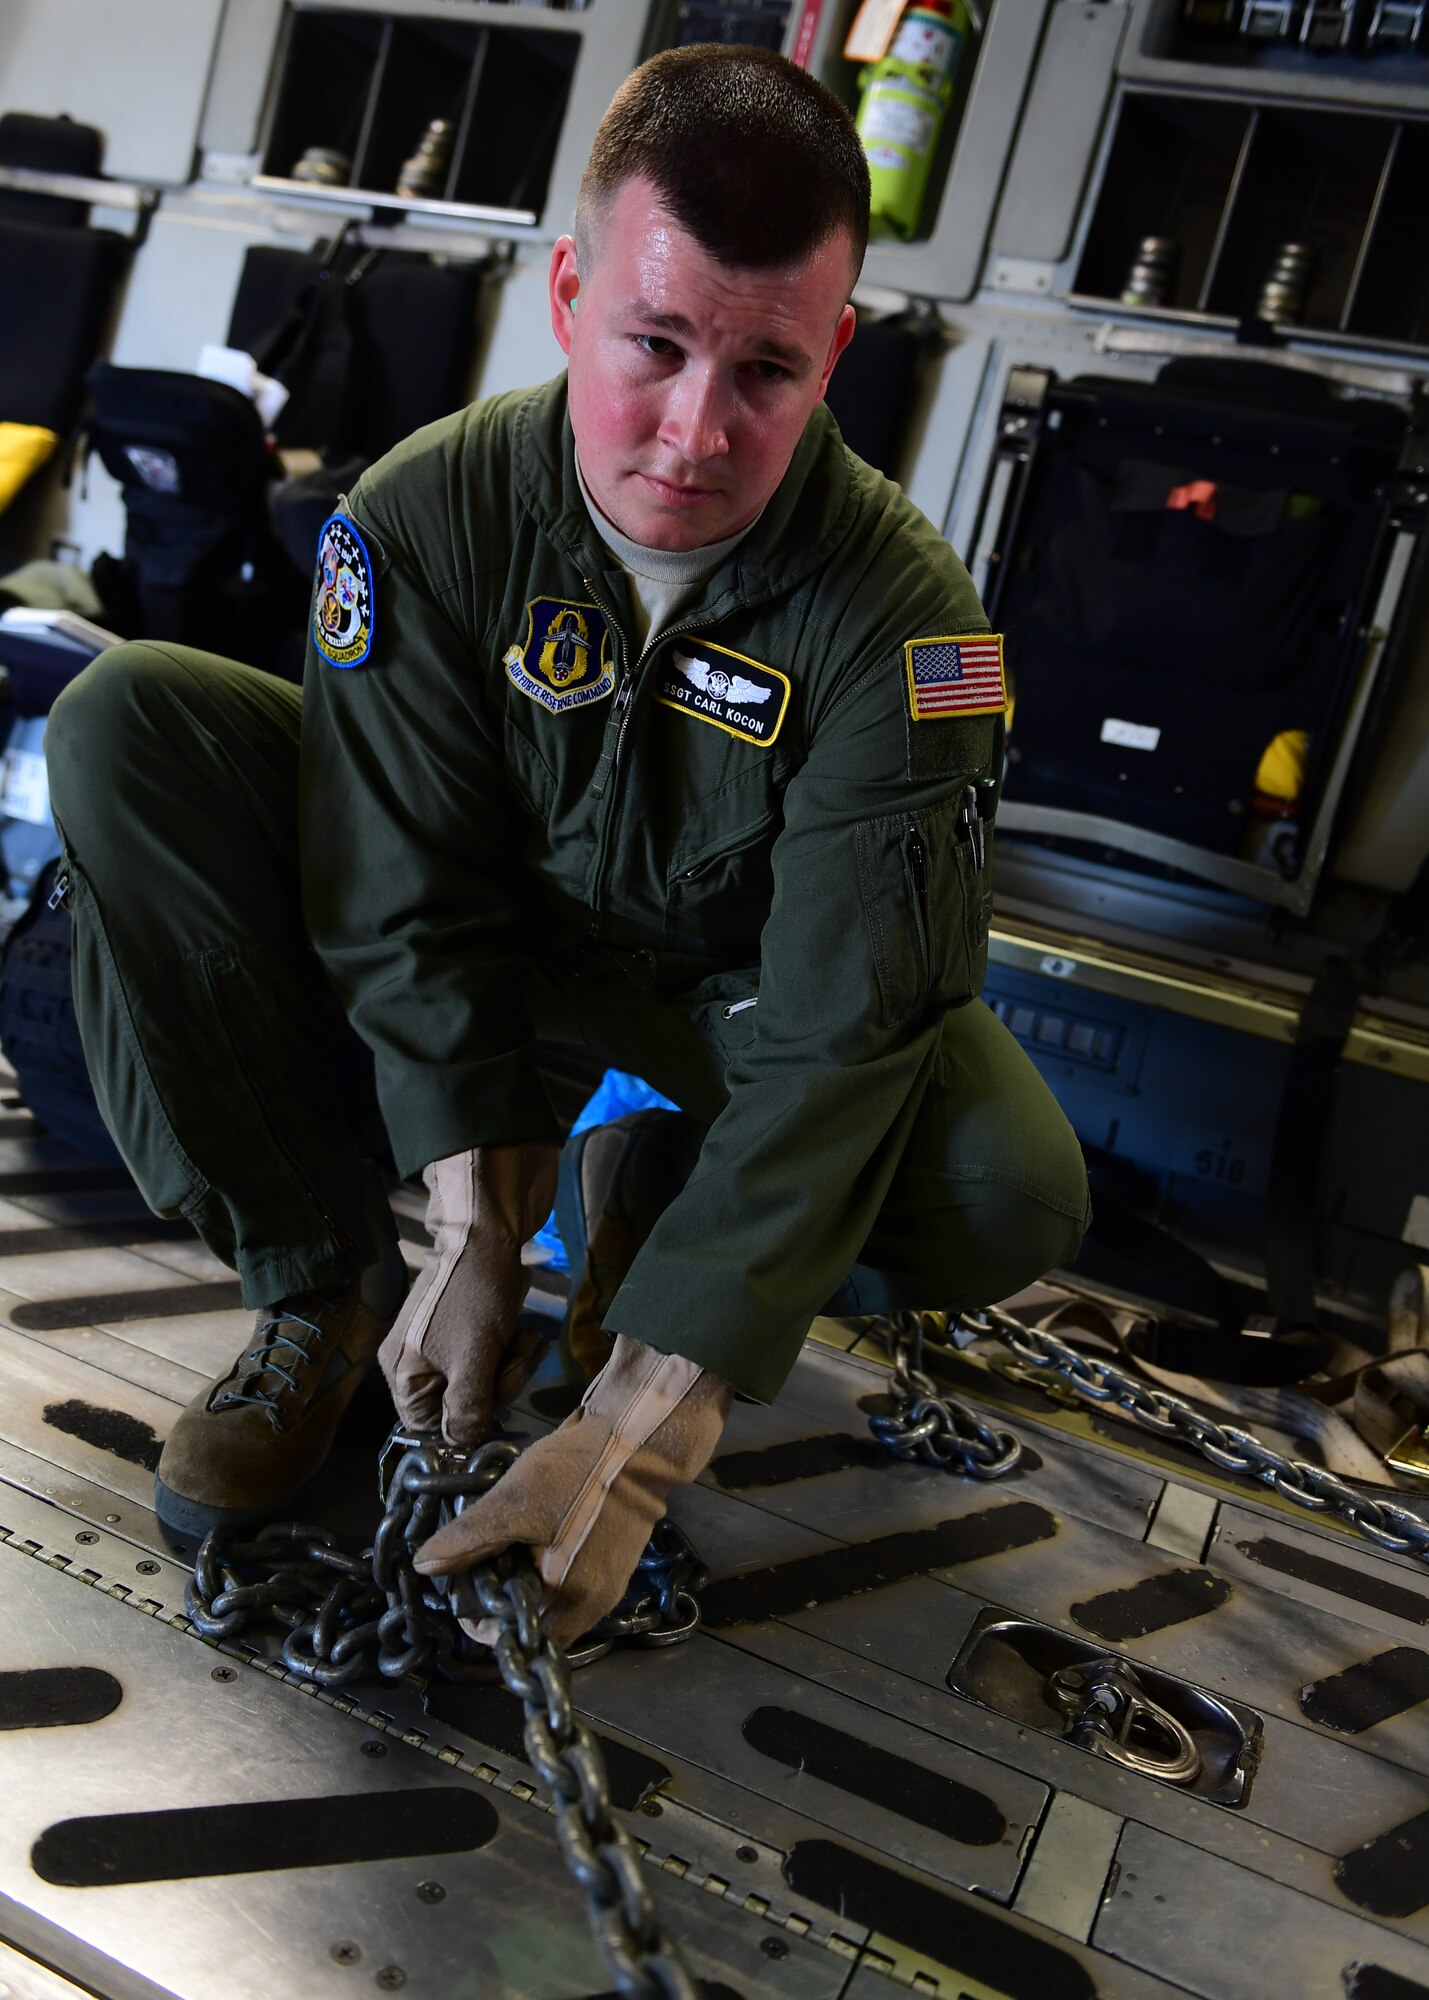 Staff Sgt. Carl Kocon, loadmaster attached to the 758th Airlift Squadron, uses heavy chains to tie down the aircraft tug, which is used to move extremely heavy aircraft, at Dobbins Air Reserve Base, Georgia, April 11, 2019. There were several points that the aircraft tug needed to be tied down by to ensure safe travel.(U.S. Air Force Photo by Senior Airman Grace Thomson)